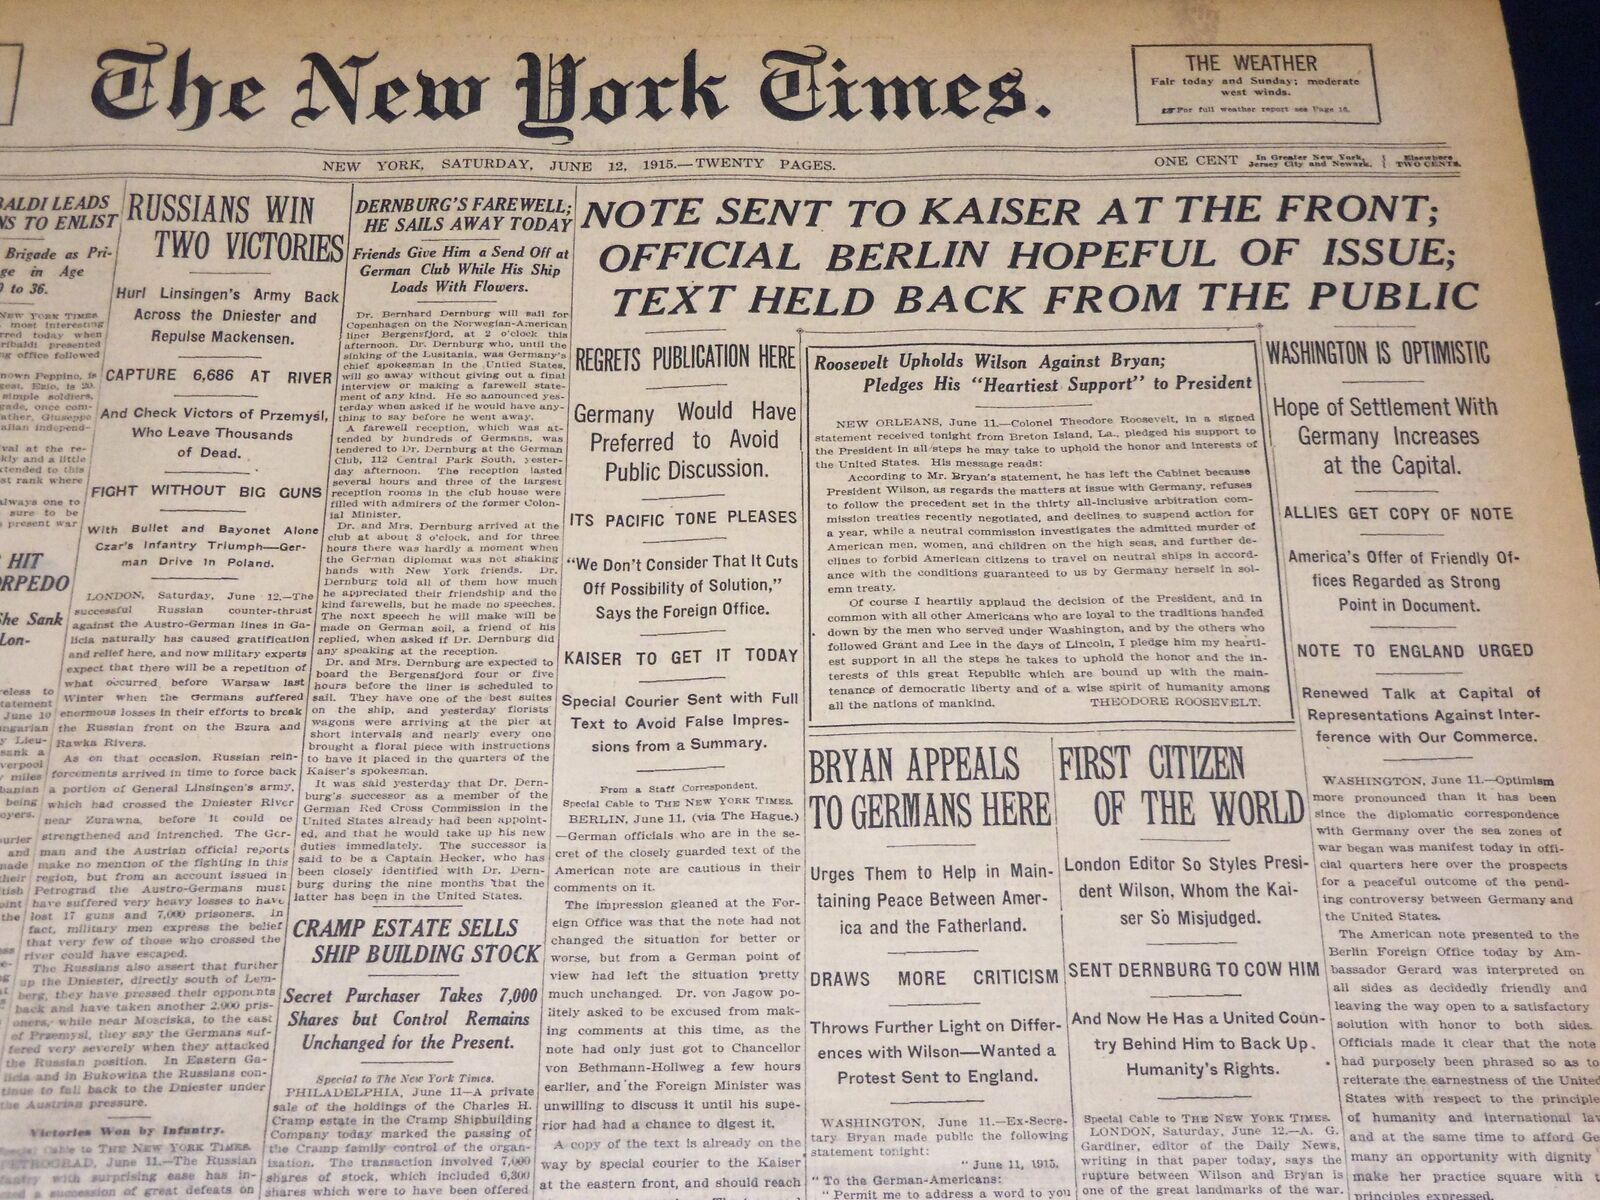 1915 JUNE 12 NEW YORK TIMES - NOTE SENT TO KAISER AT THE FRONT - NT 7700